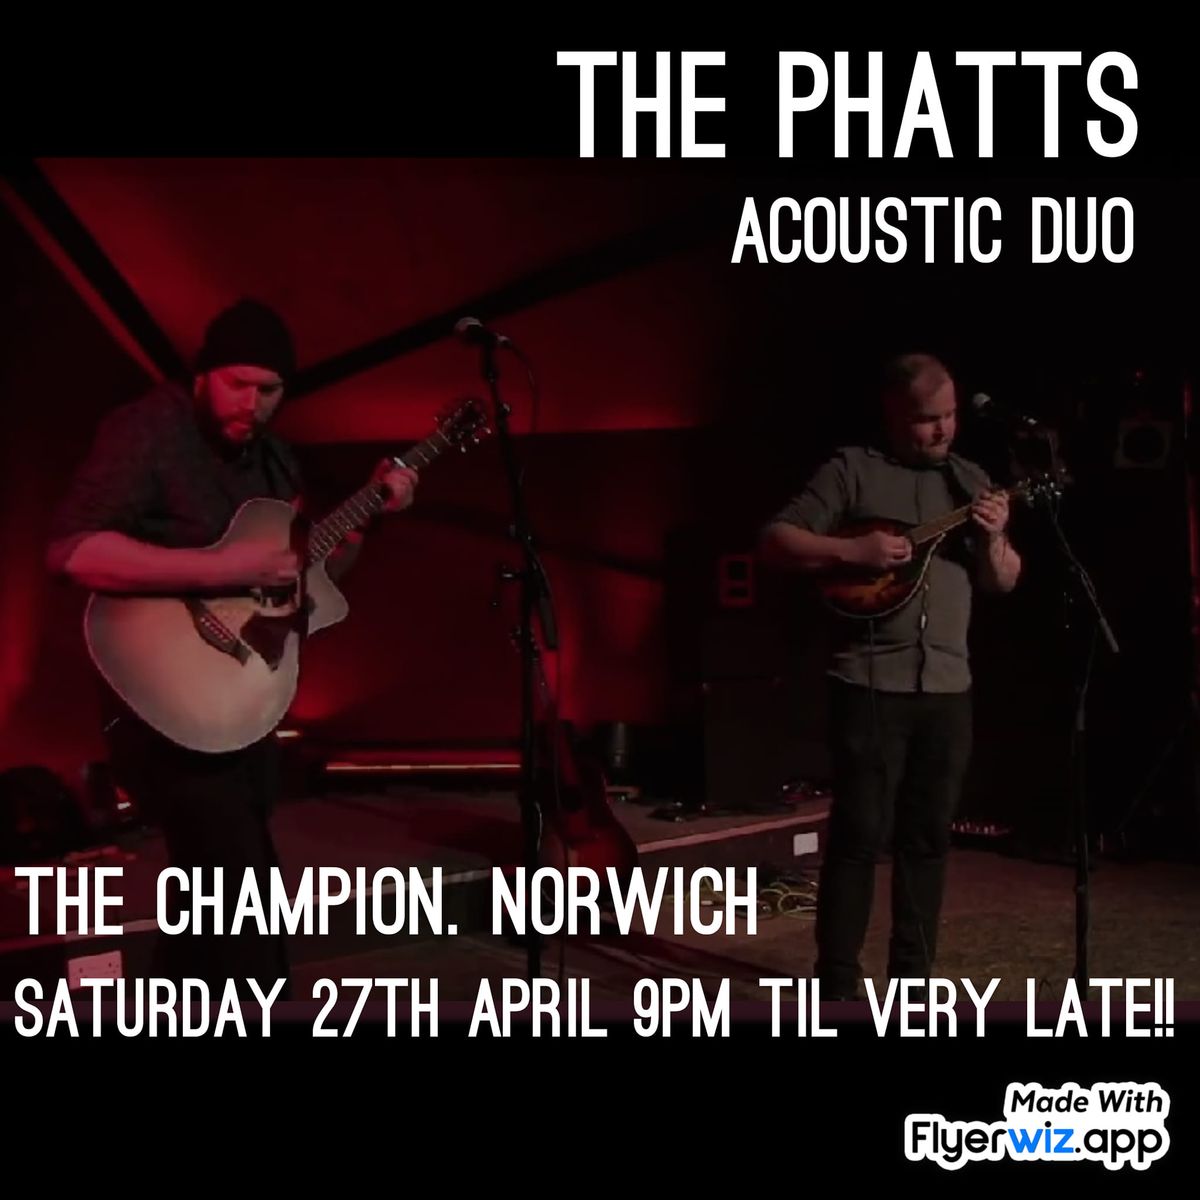 The Phatts at The Champion, Norwich!